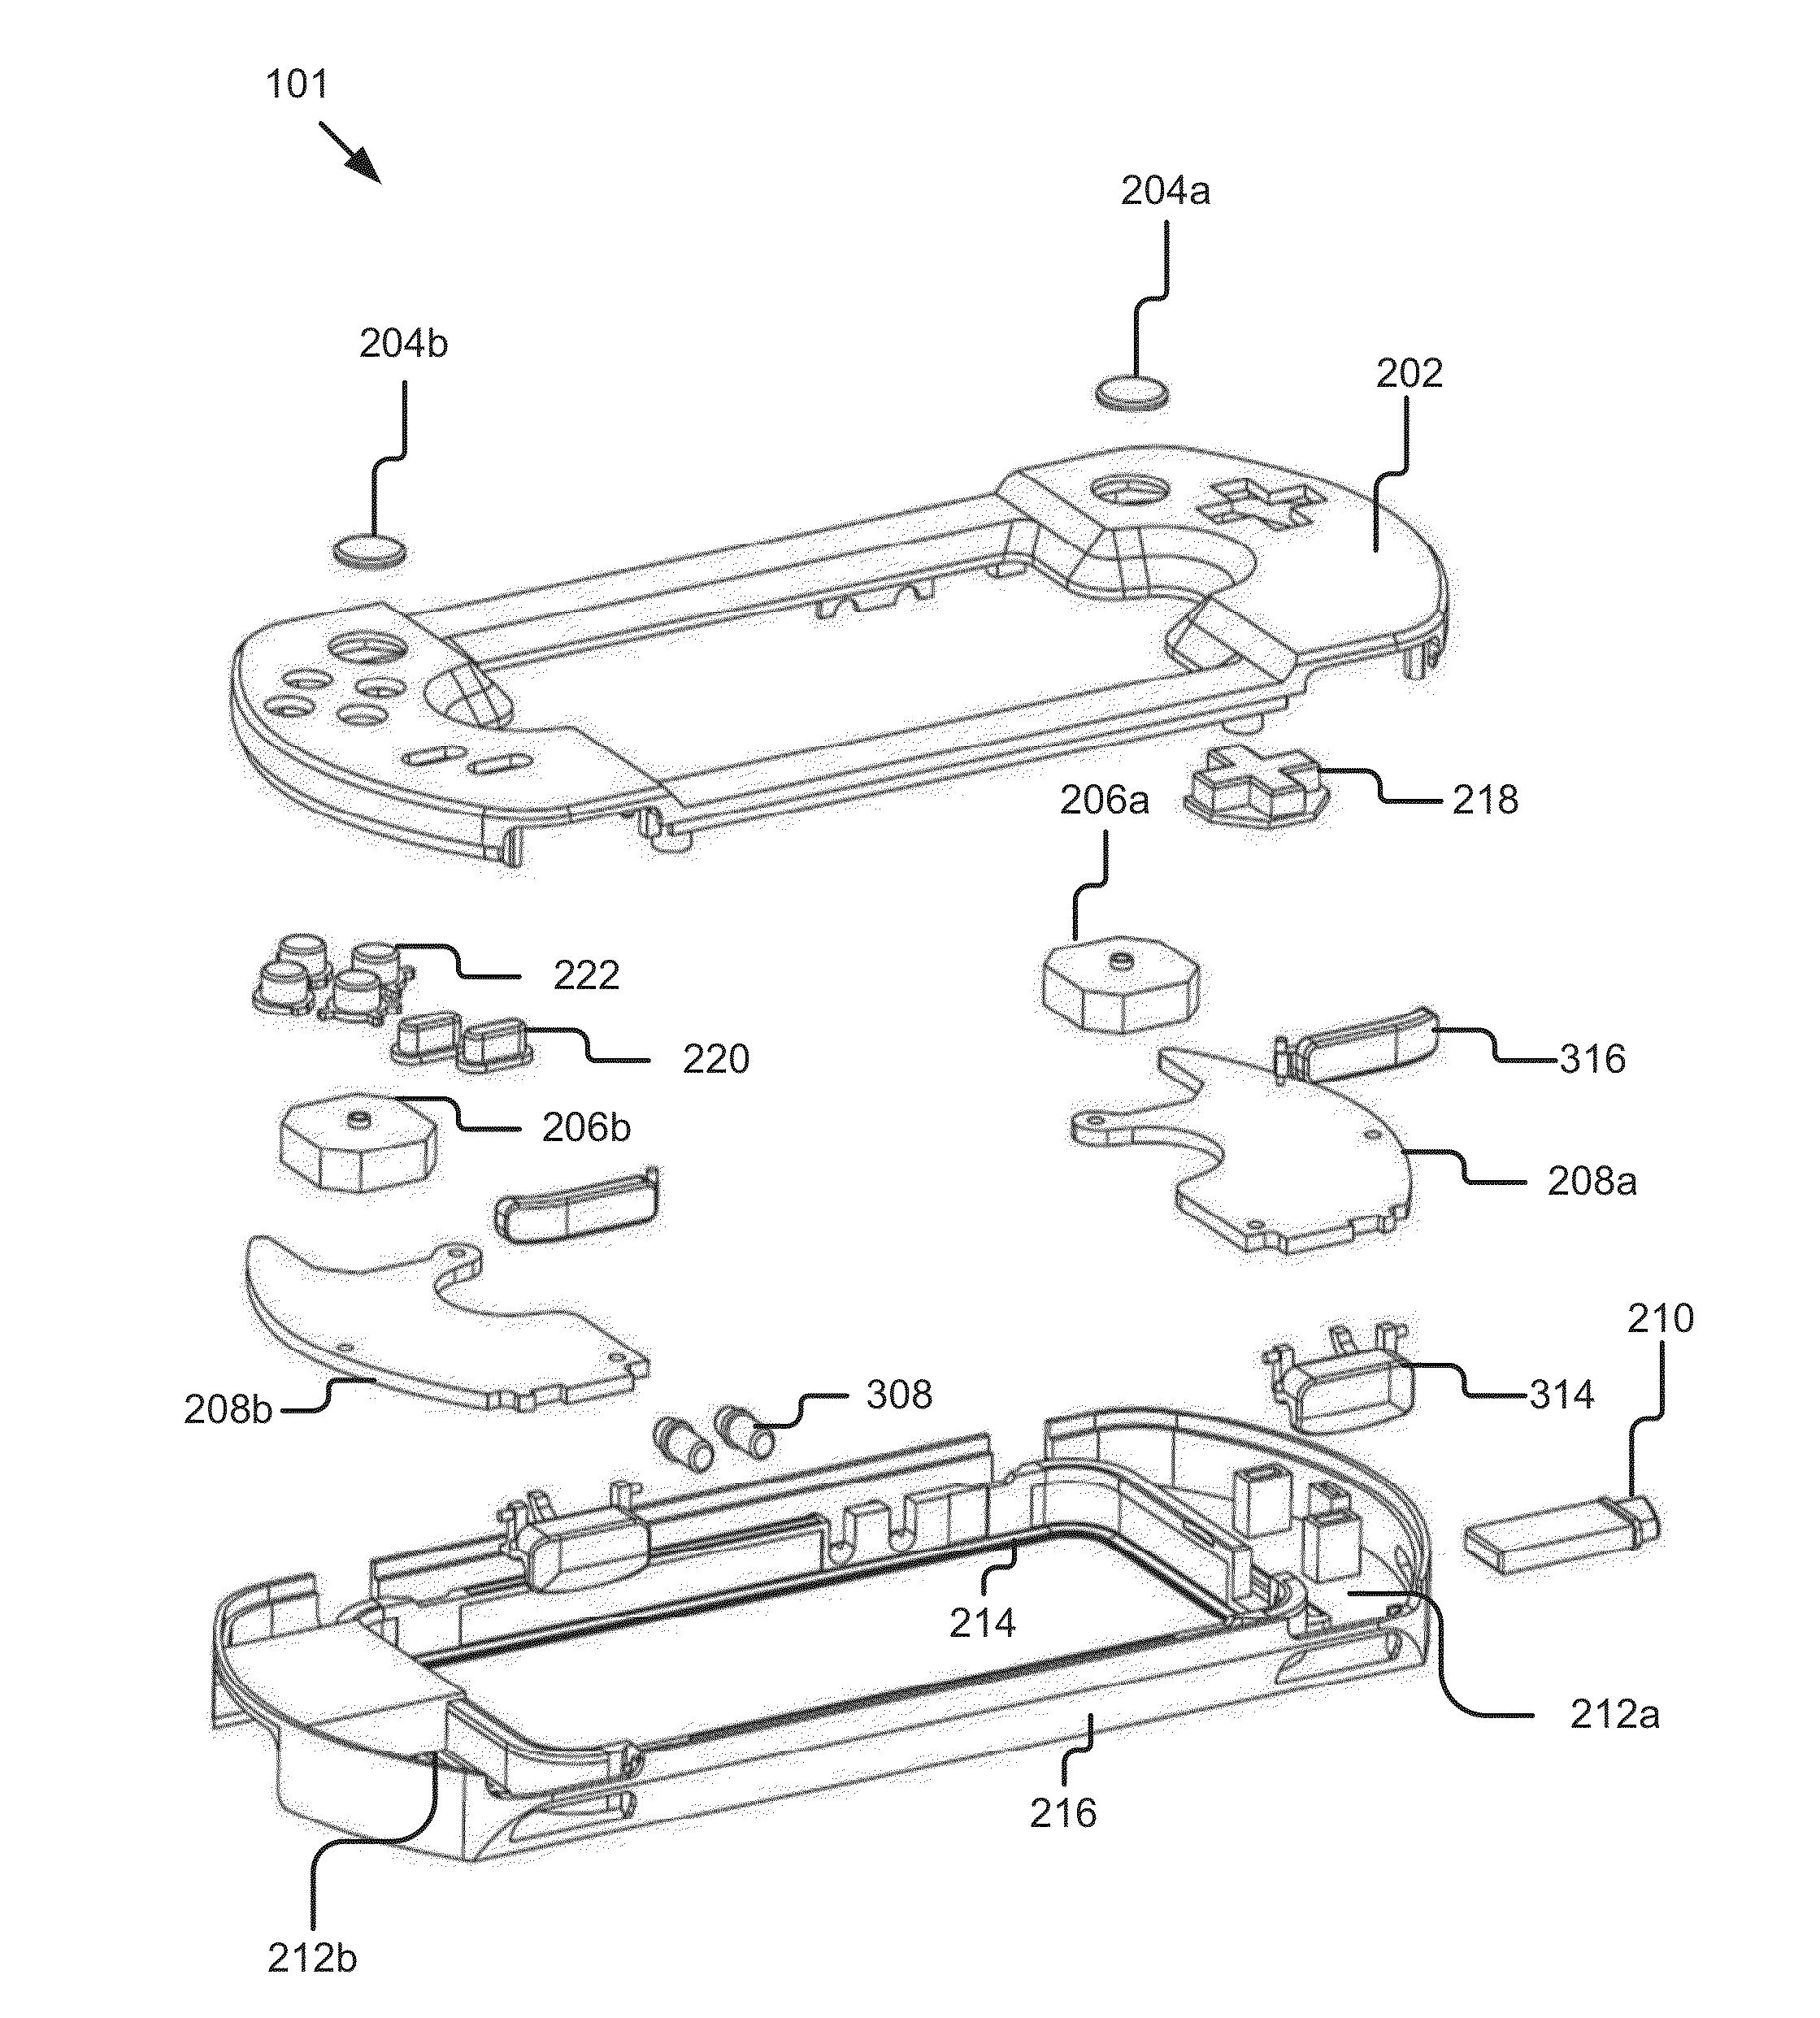 Game Controller for a Portable Computing Device